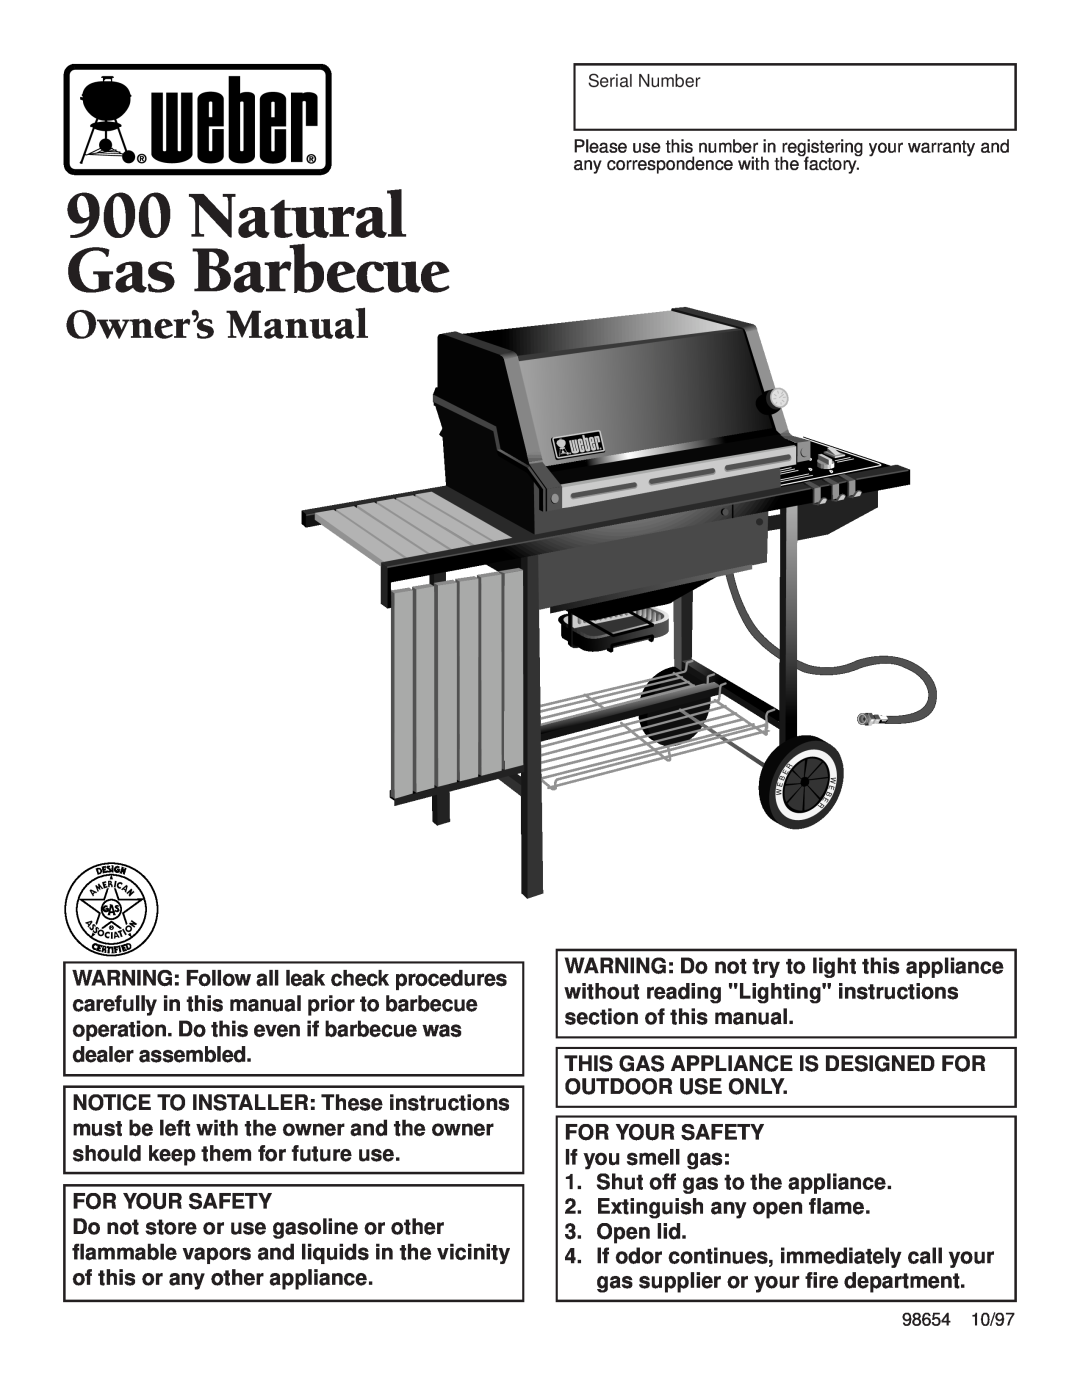 Weber 3000 LX owner manual Natural Gas Barbecue, Owner’s Manual, For Your Safety, Extinguish any open flame 3. Open lid 